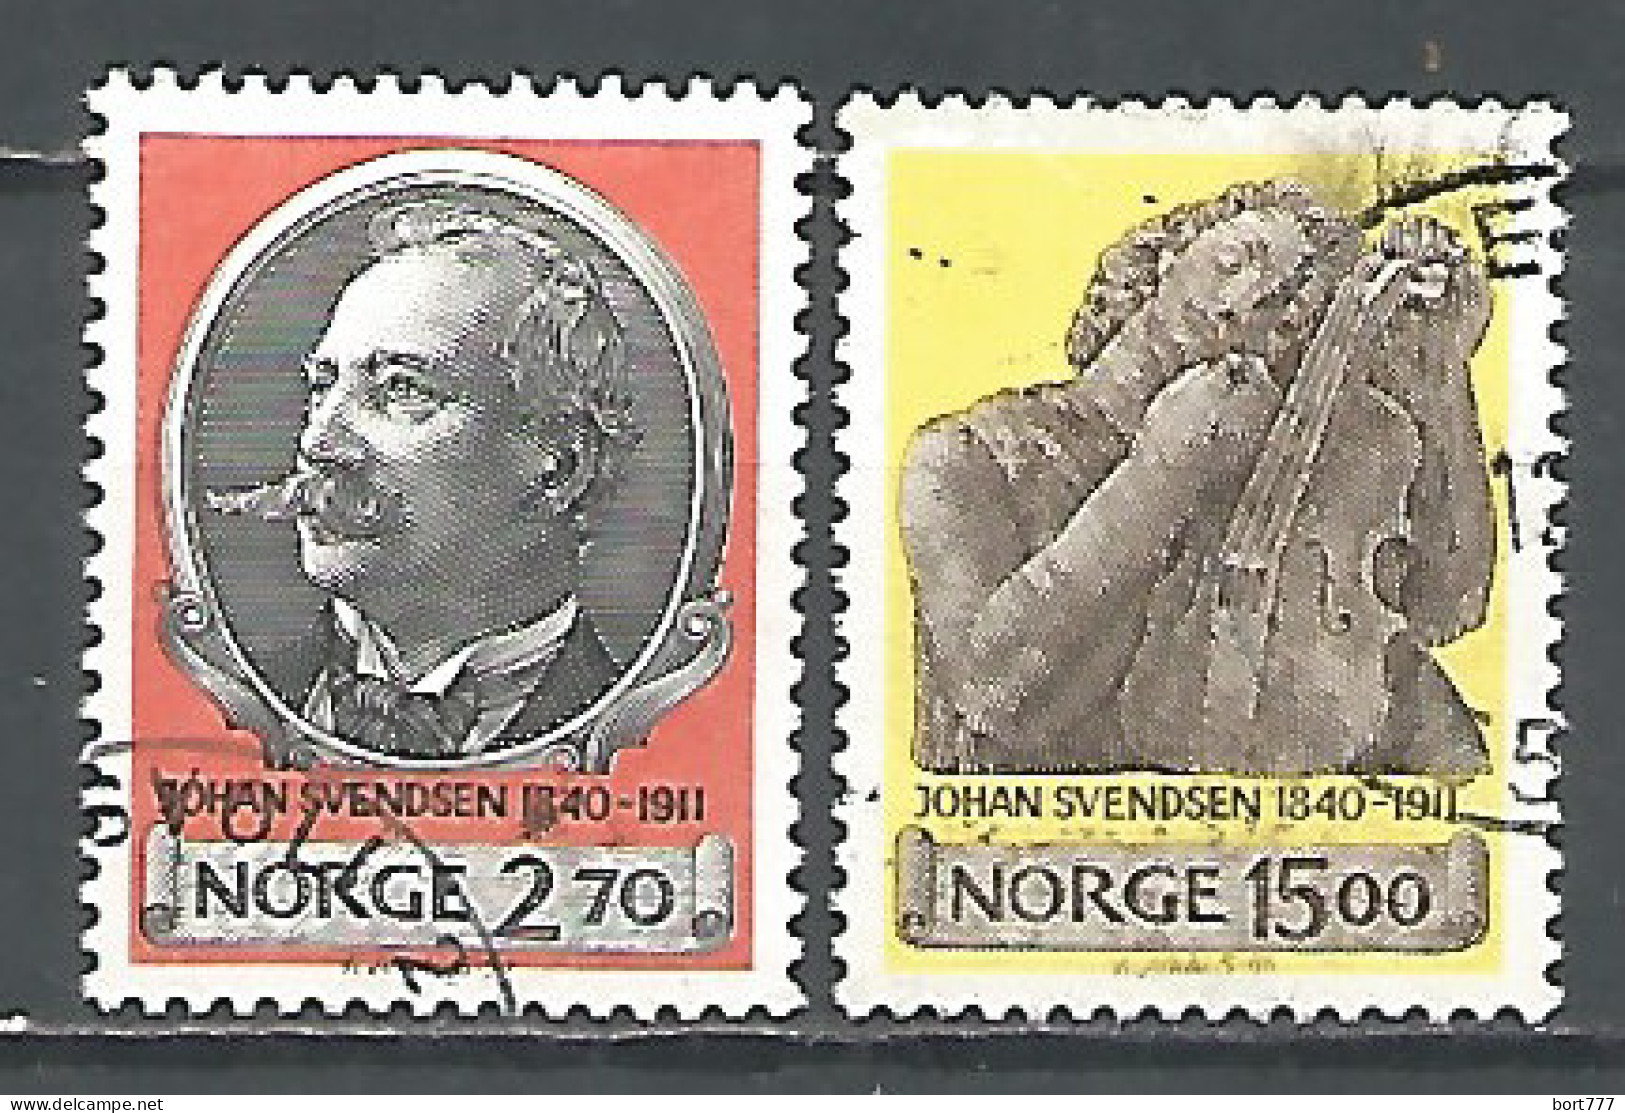 Norway 1990 Used Stamps  - Usados